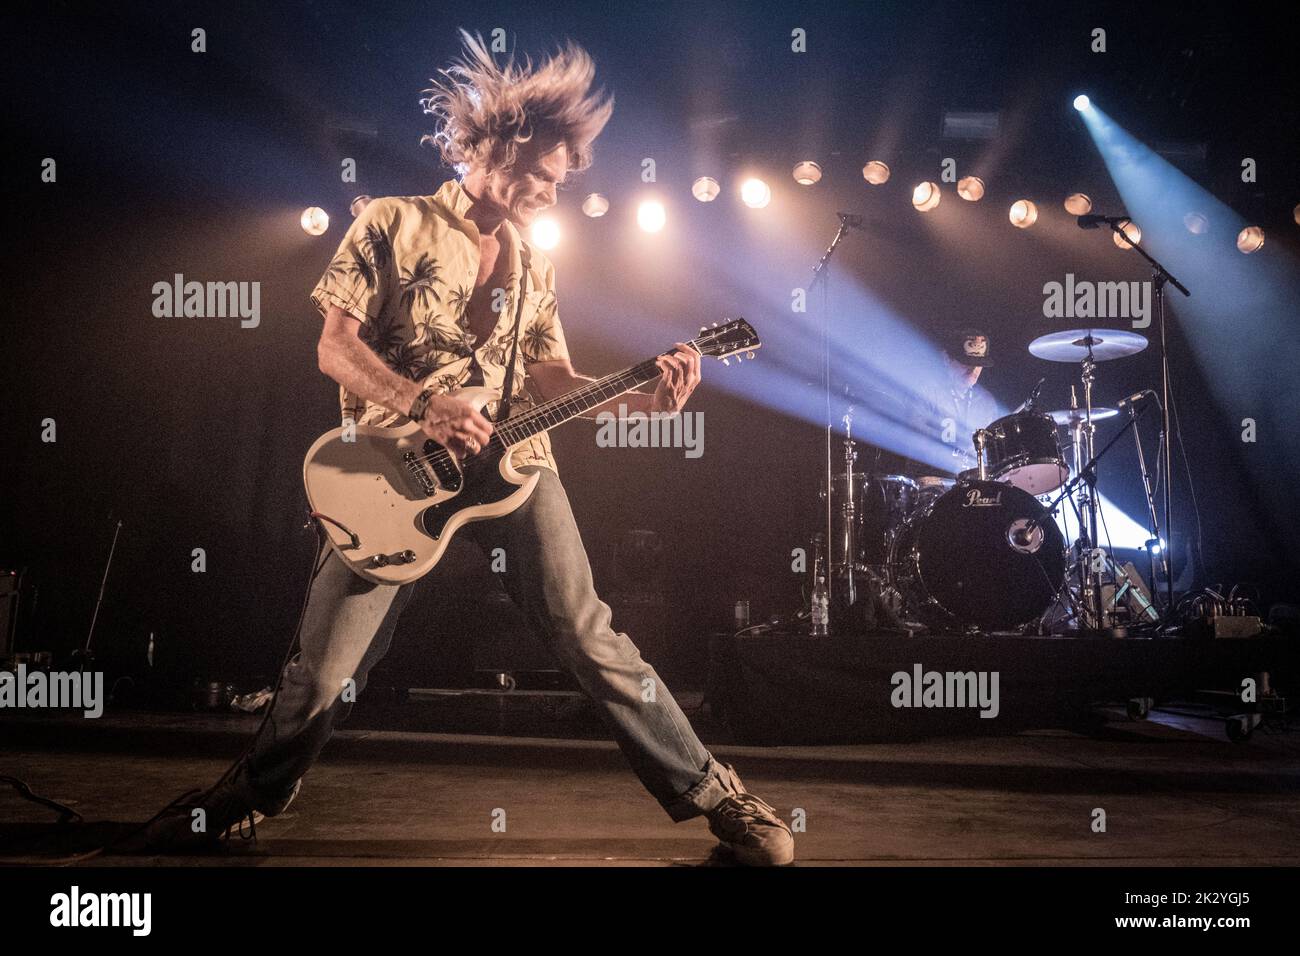 Roskilde, Denmark. 03rd, July 2022. The American punk rock band Surfbort performs a live concert at the Danish music festival Roskilde Festival 2022 in Roskilde. (Photo credit: Gonzales Photo - Thomas Rasmussen). Stock Photo